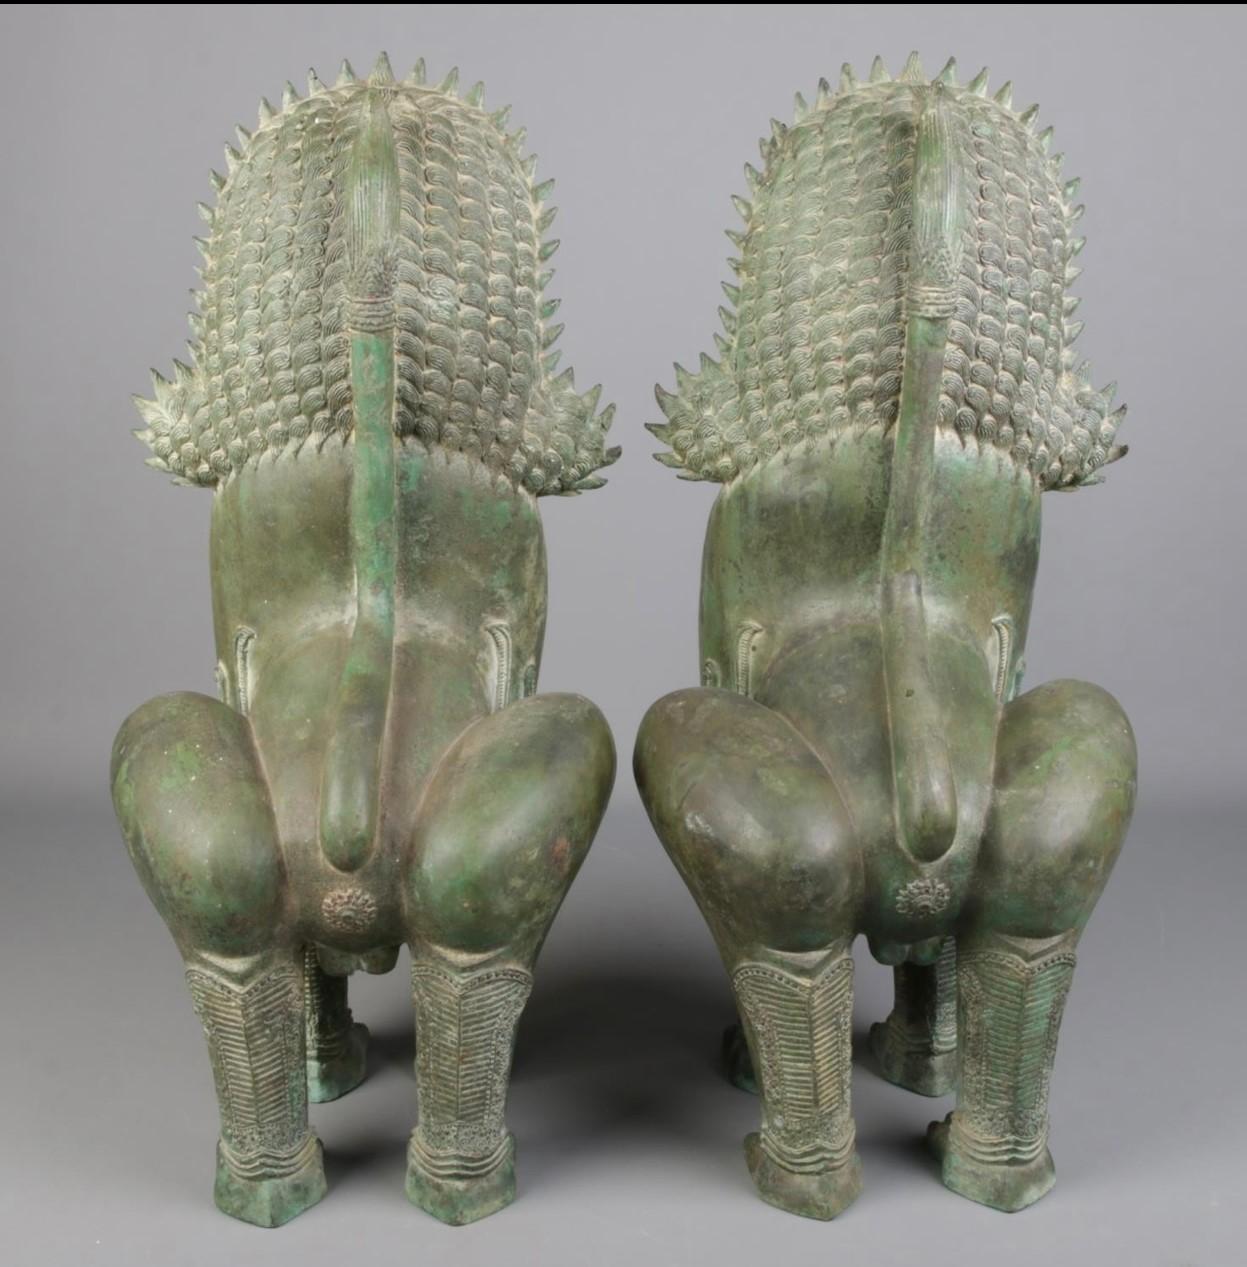 A large pair of bronze khmer sculptures modelled as temple lions.

These Lion sculptures represent images of royalty and imposing presences giving impressions of figures at the courts with considerable power.
Khmer sculptures are from the Hindu